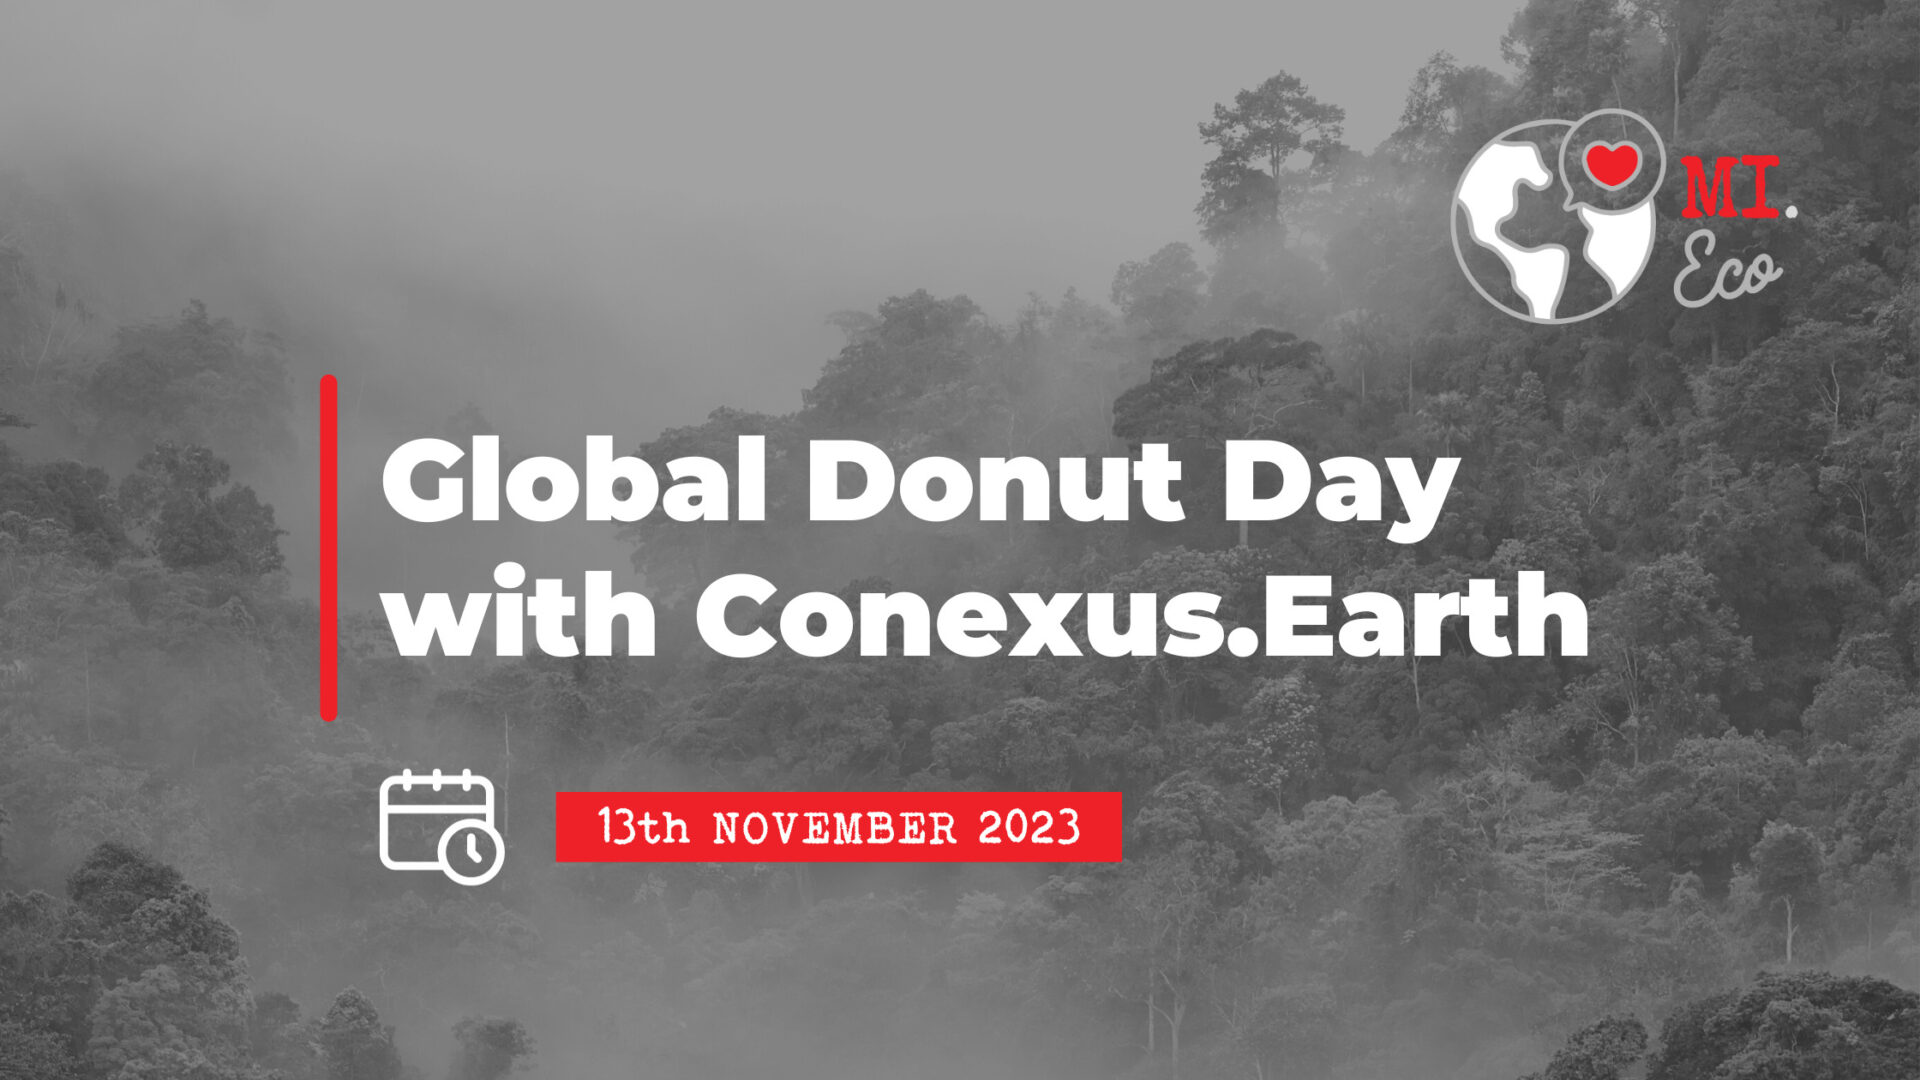 13 November: Global Donut Day with Conexus.Earth